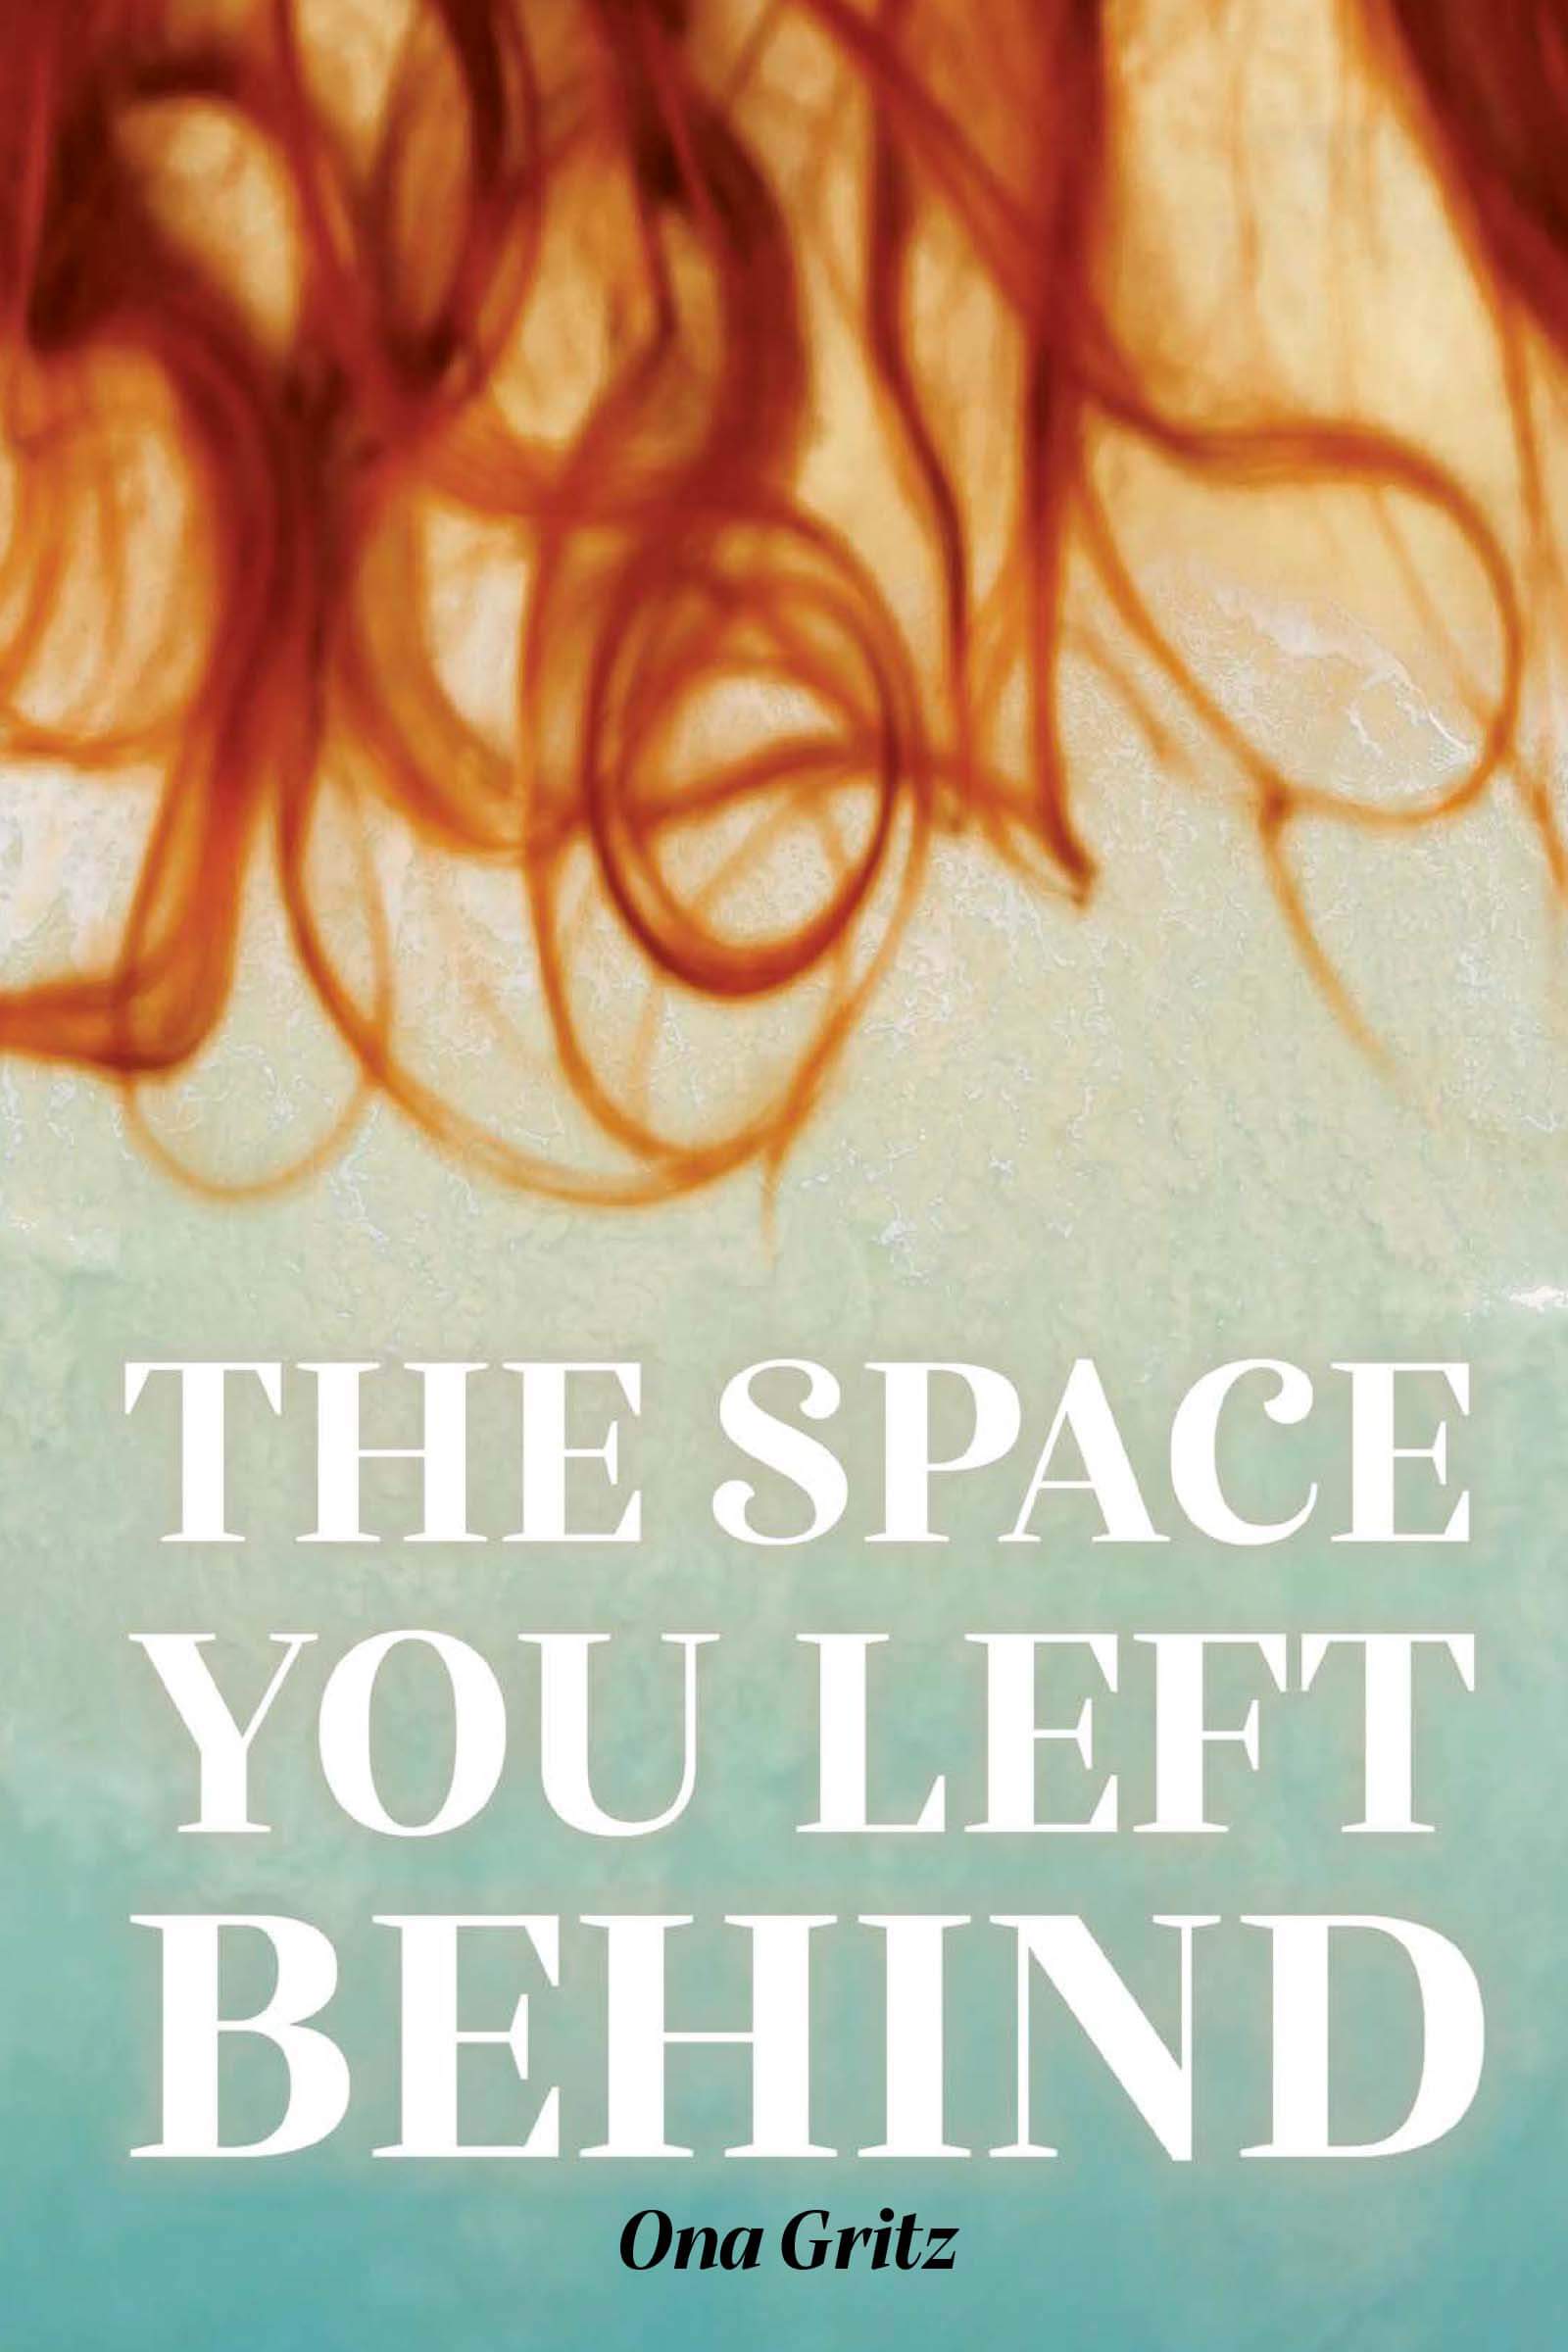 The Space You Left Behind